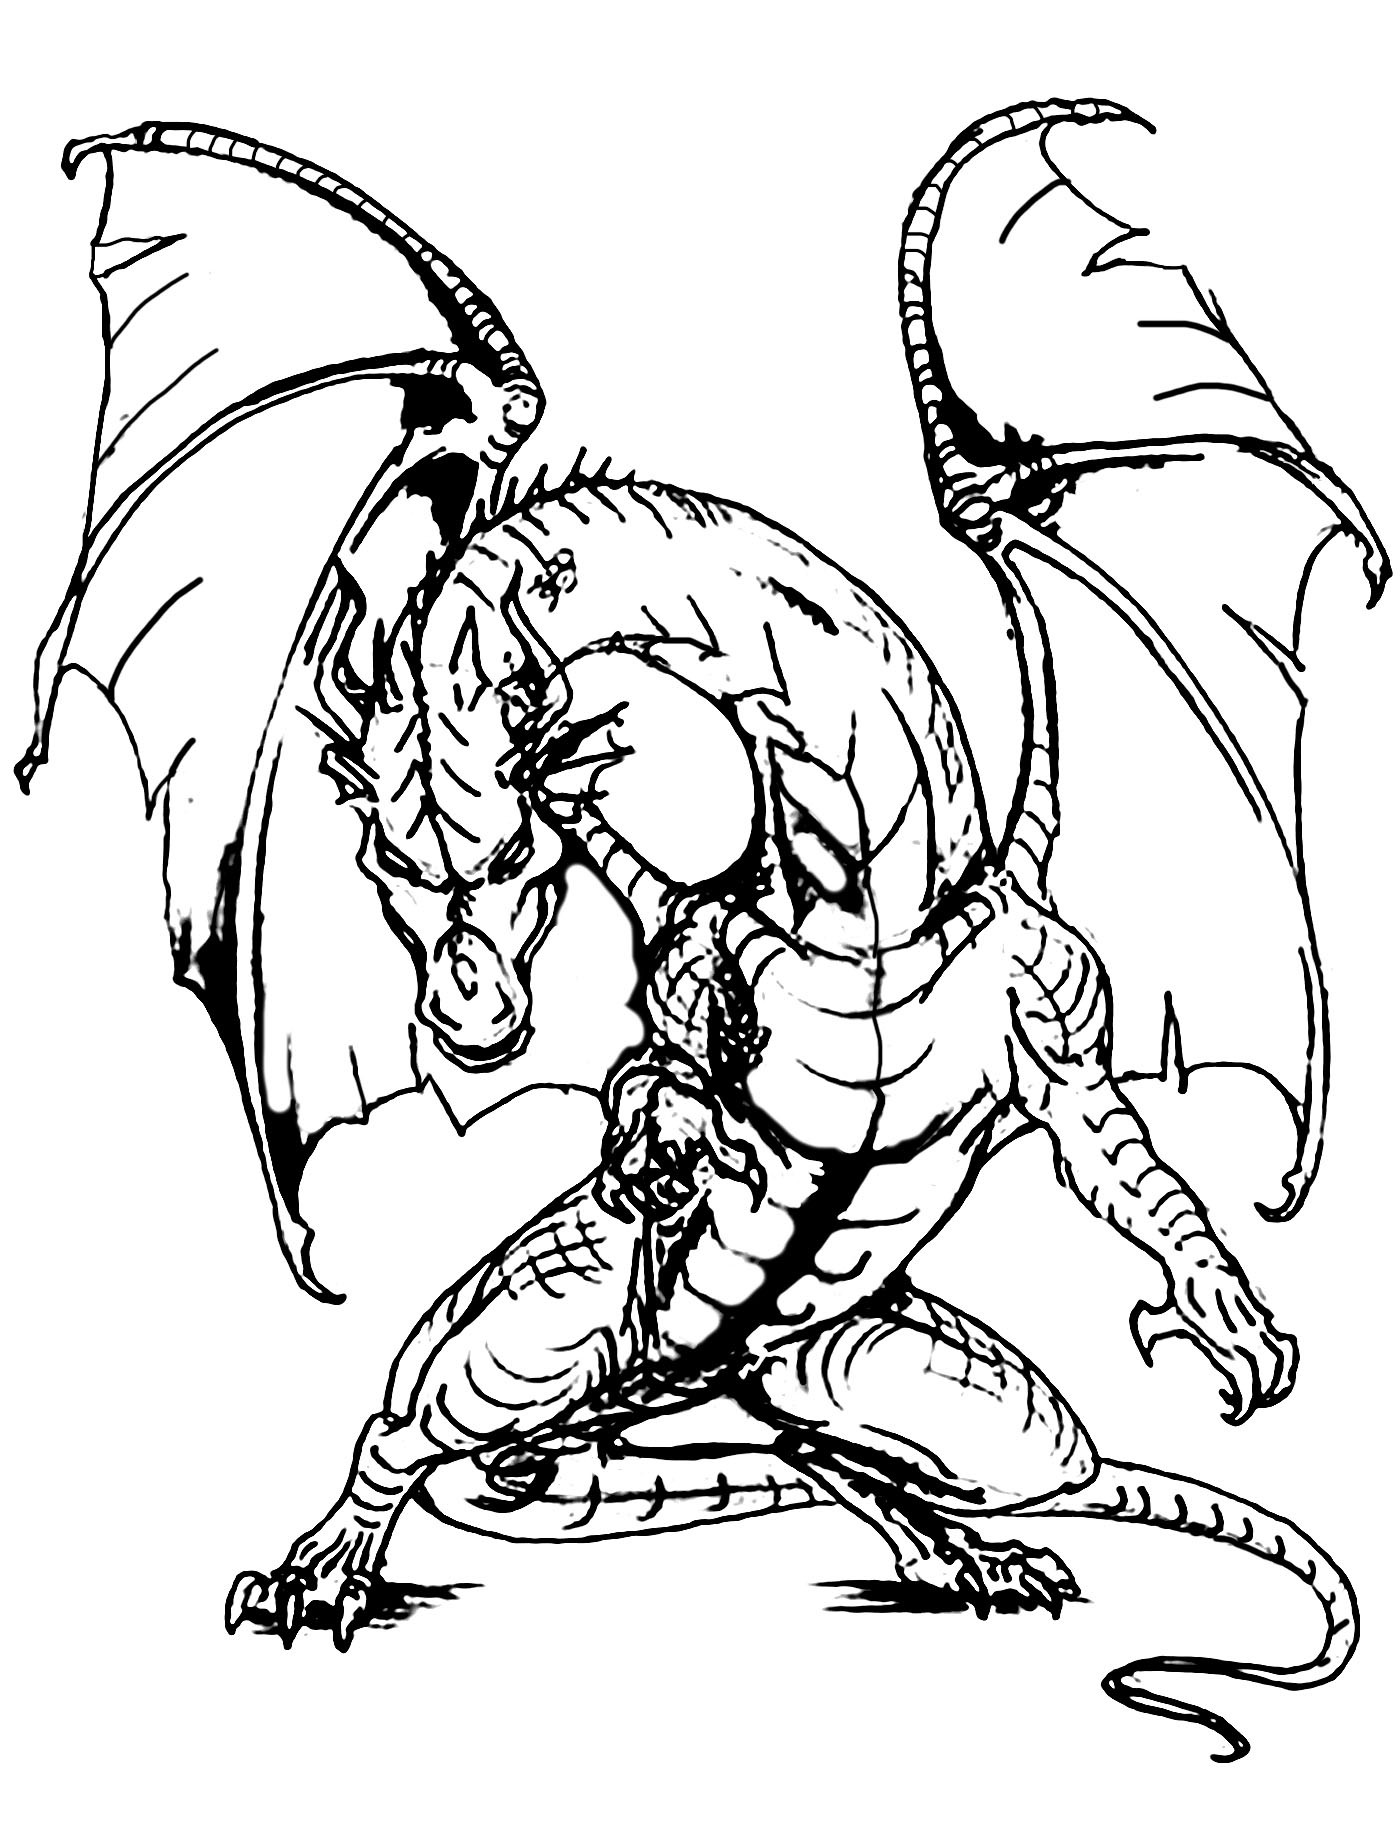 Dragon Coloring Books For Adults
 Giant dragon